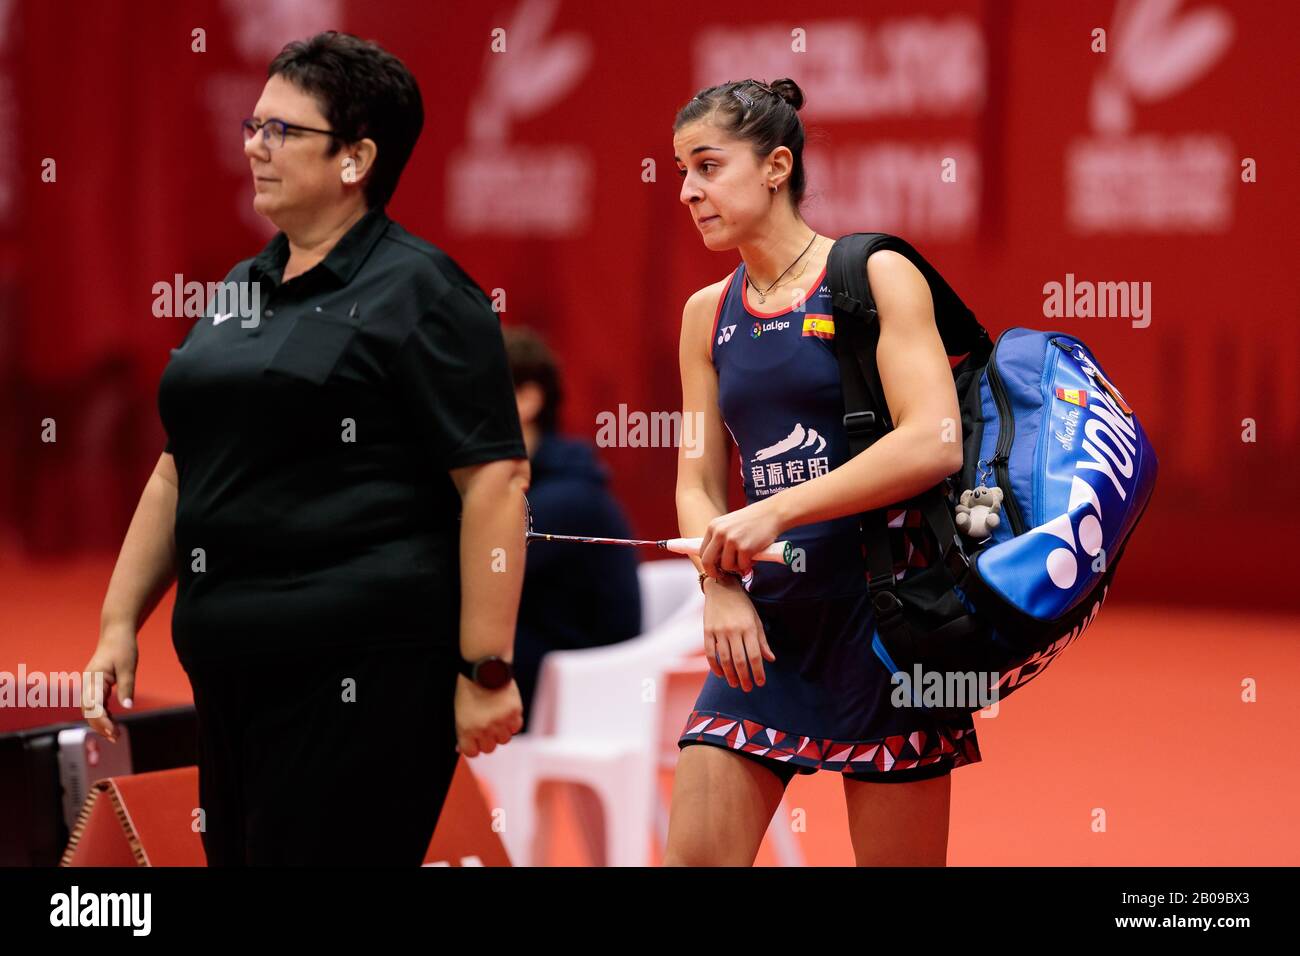 Barcelona, Spain. 19th Feb, 2020. Barcelona Spain Master 2020 - Day 2; Carolina Marin of Spain competes in the Women's Singles qualification Round 1 match against Natalia Perminiova of Russia on day two of the Barcelona Spain Master at Vall d'Hebron Olympic Sports Centre on February 19, 2020 in Barcelona, Spain. Credit: Dax Images/Alamy Live News Stock Photo